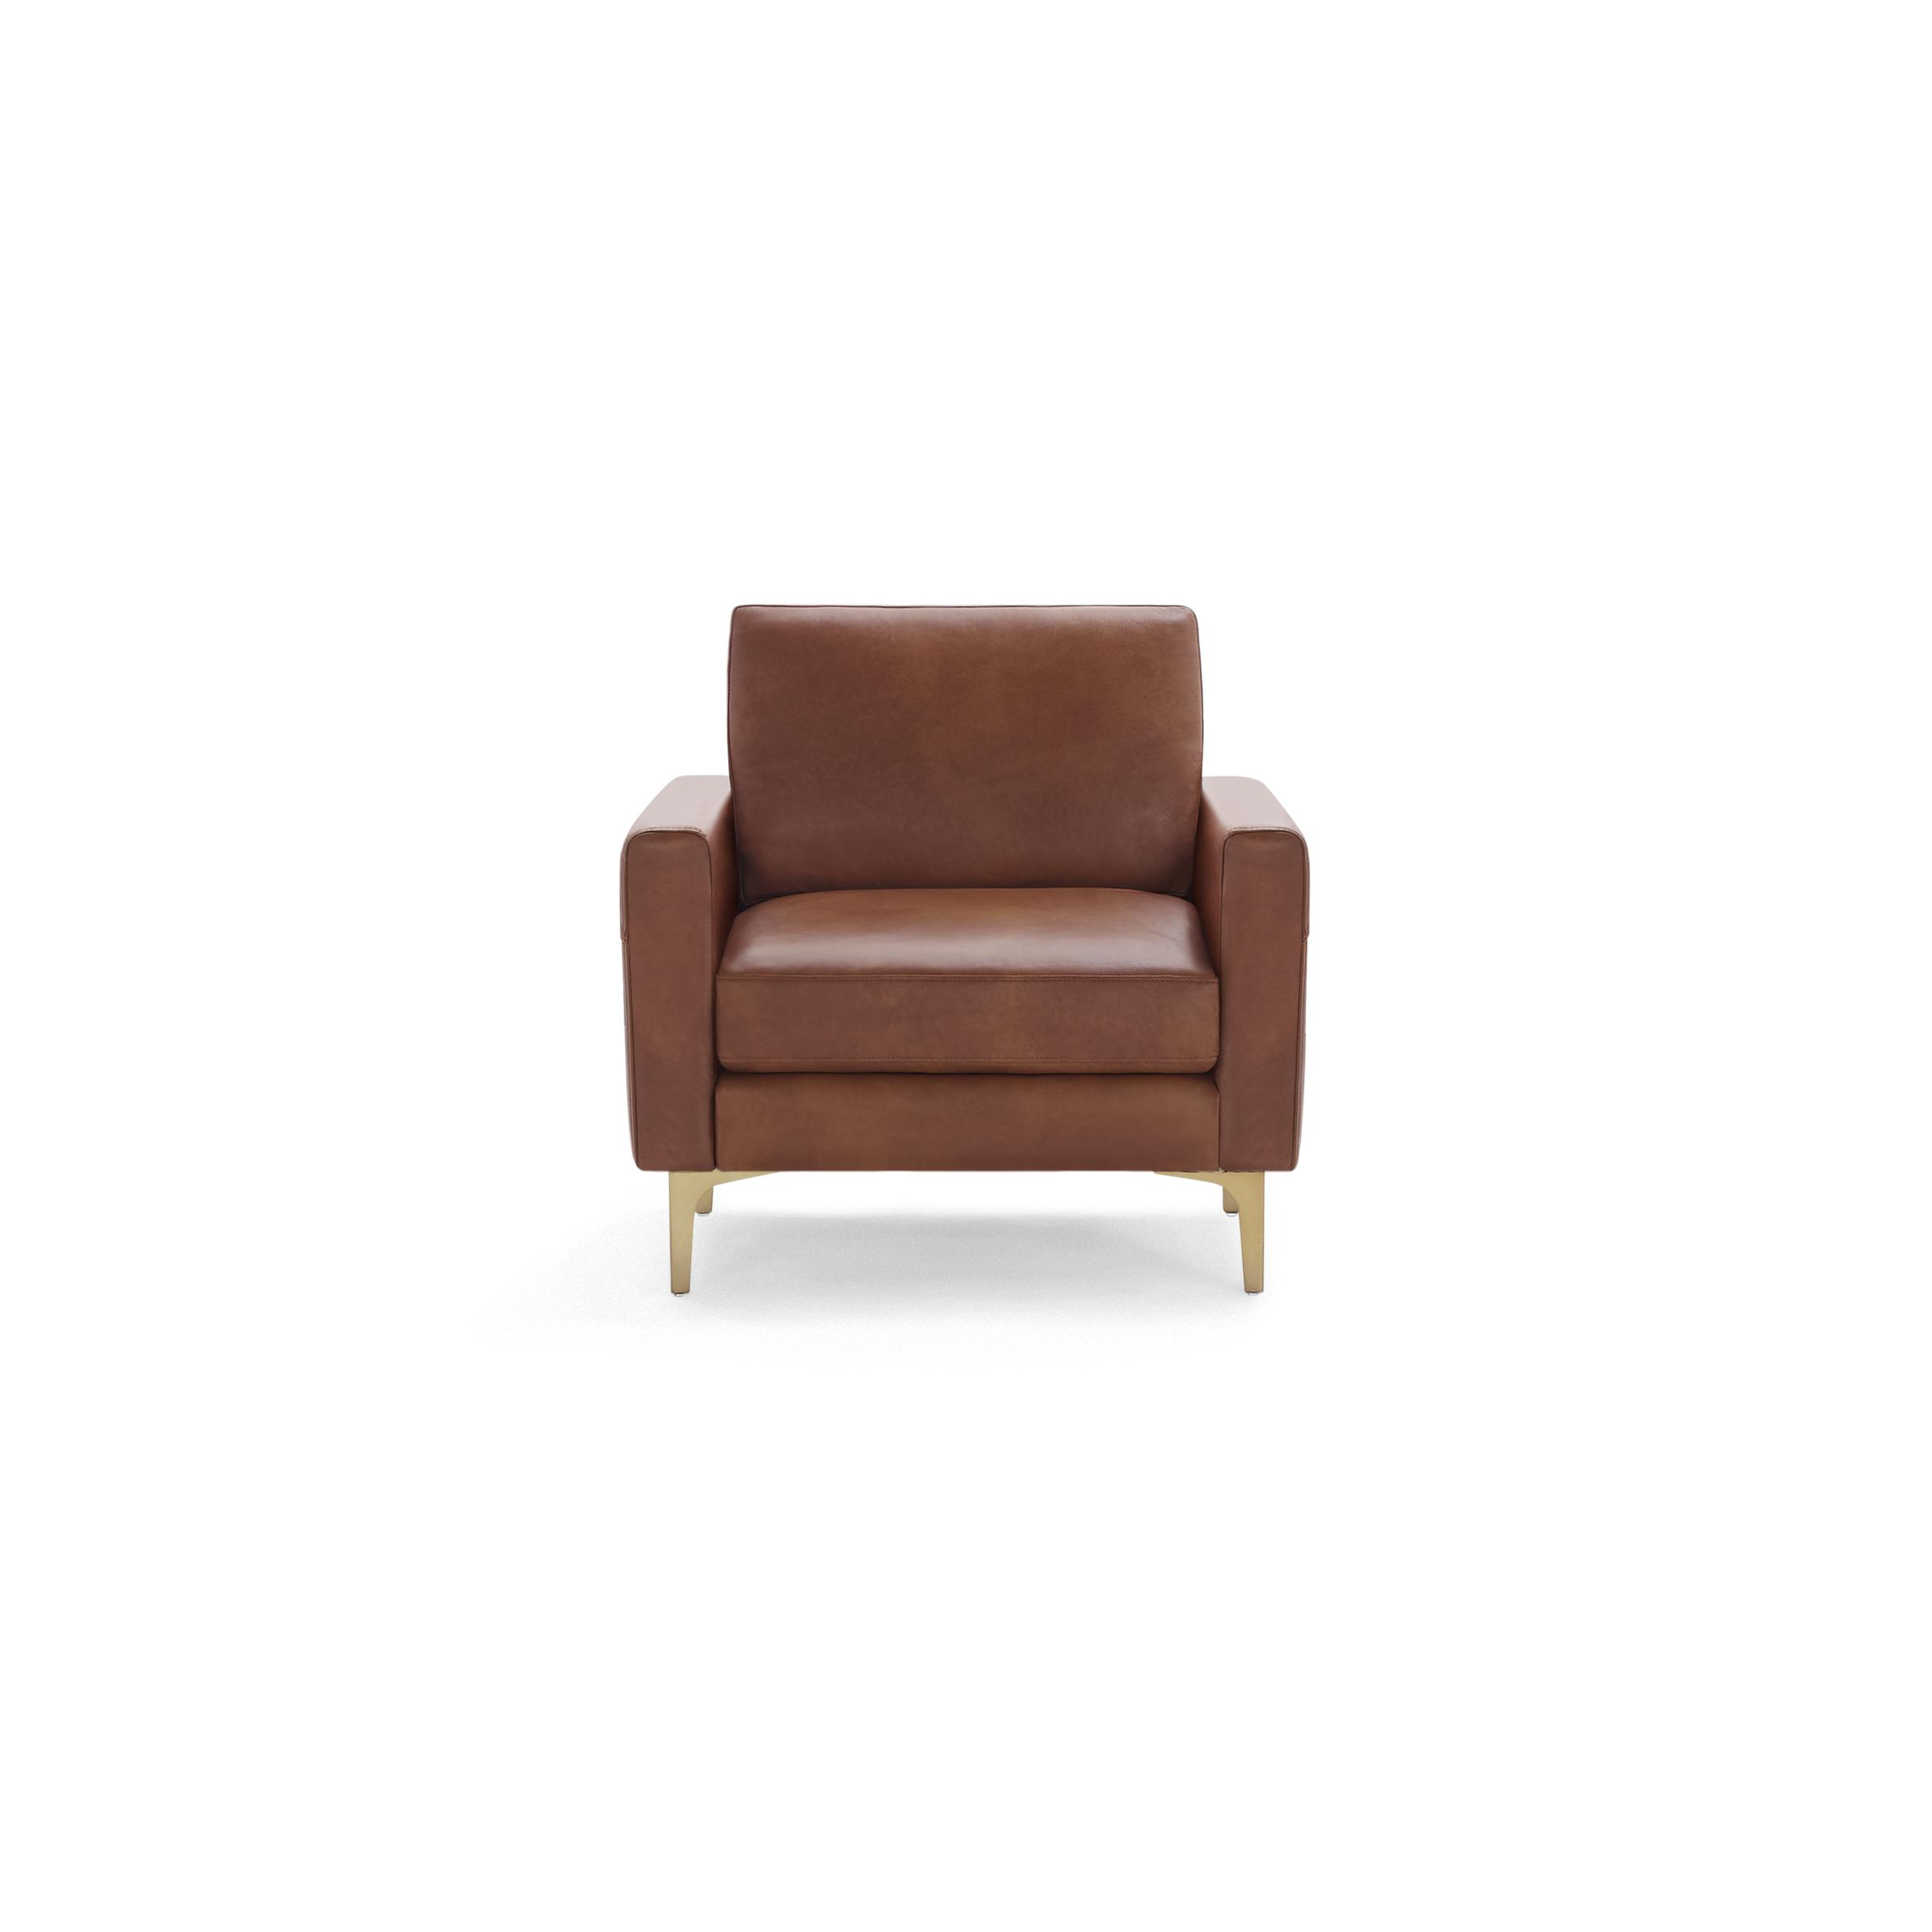 Nomad Leather Club Chair in Chestnut, Brass Legs - Burrow